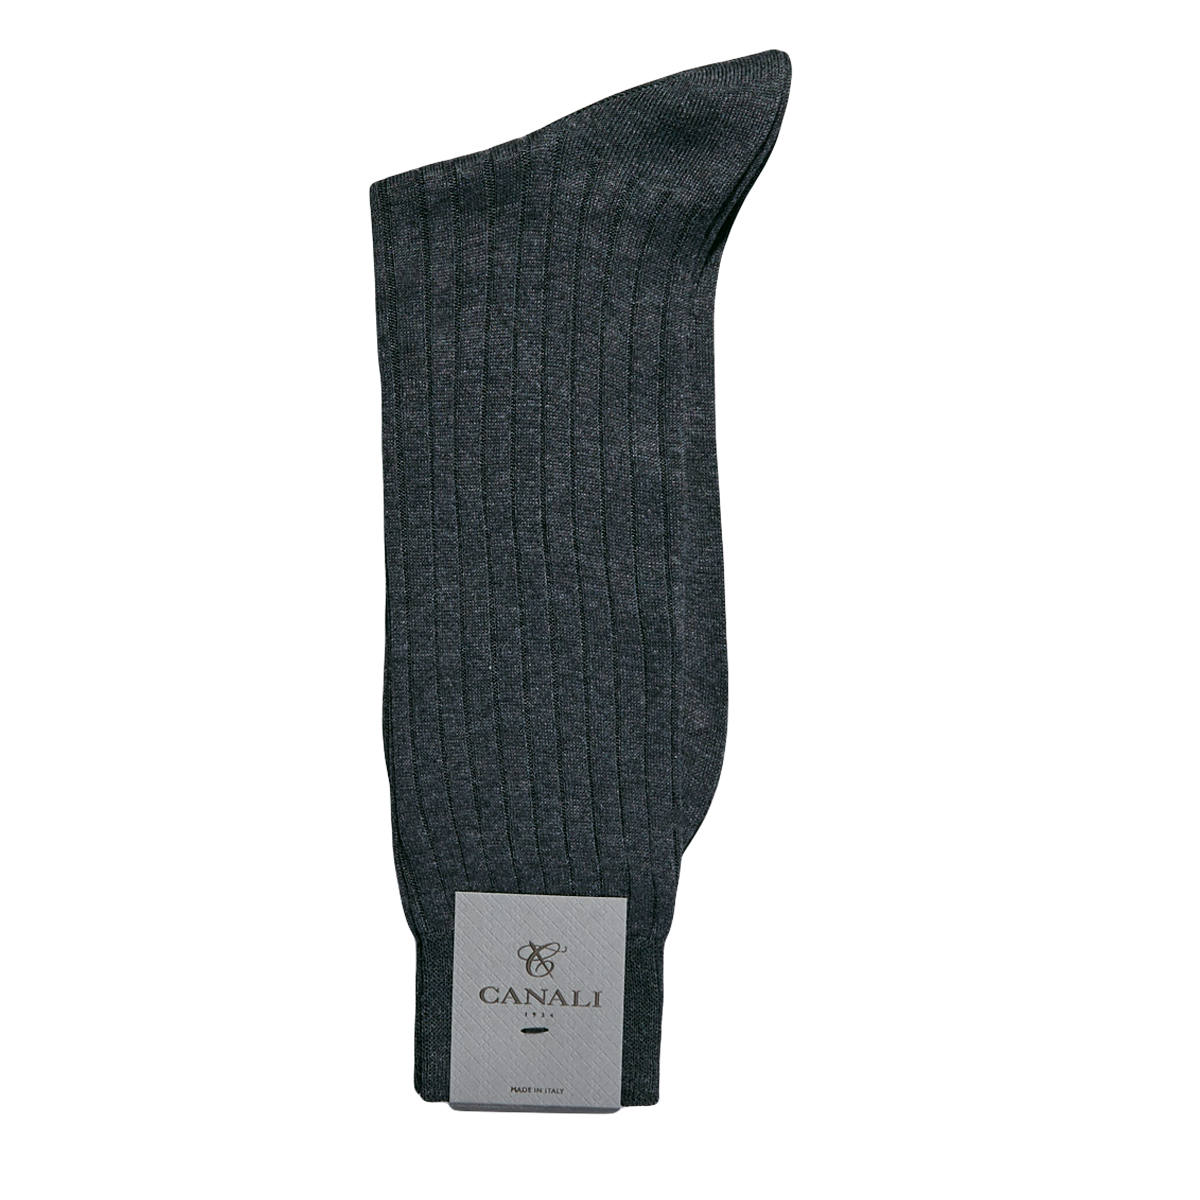 A Canali Grey Ribbed Cotton Sock made with Egyptian cotton for exceptional comfort.